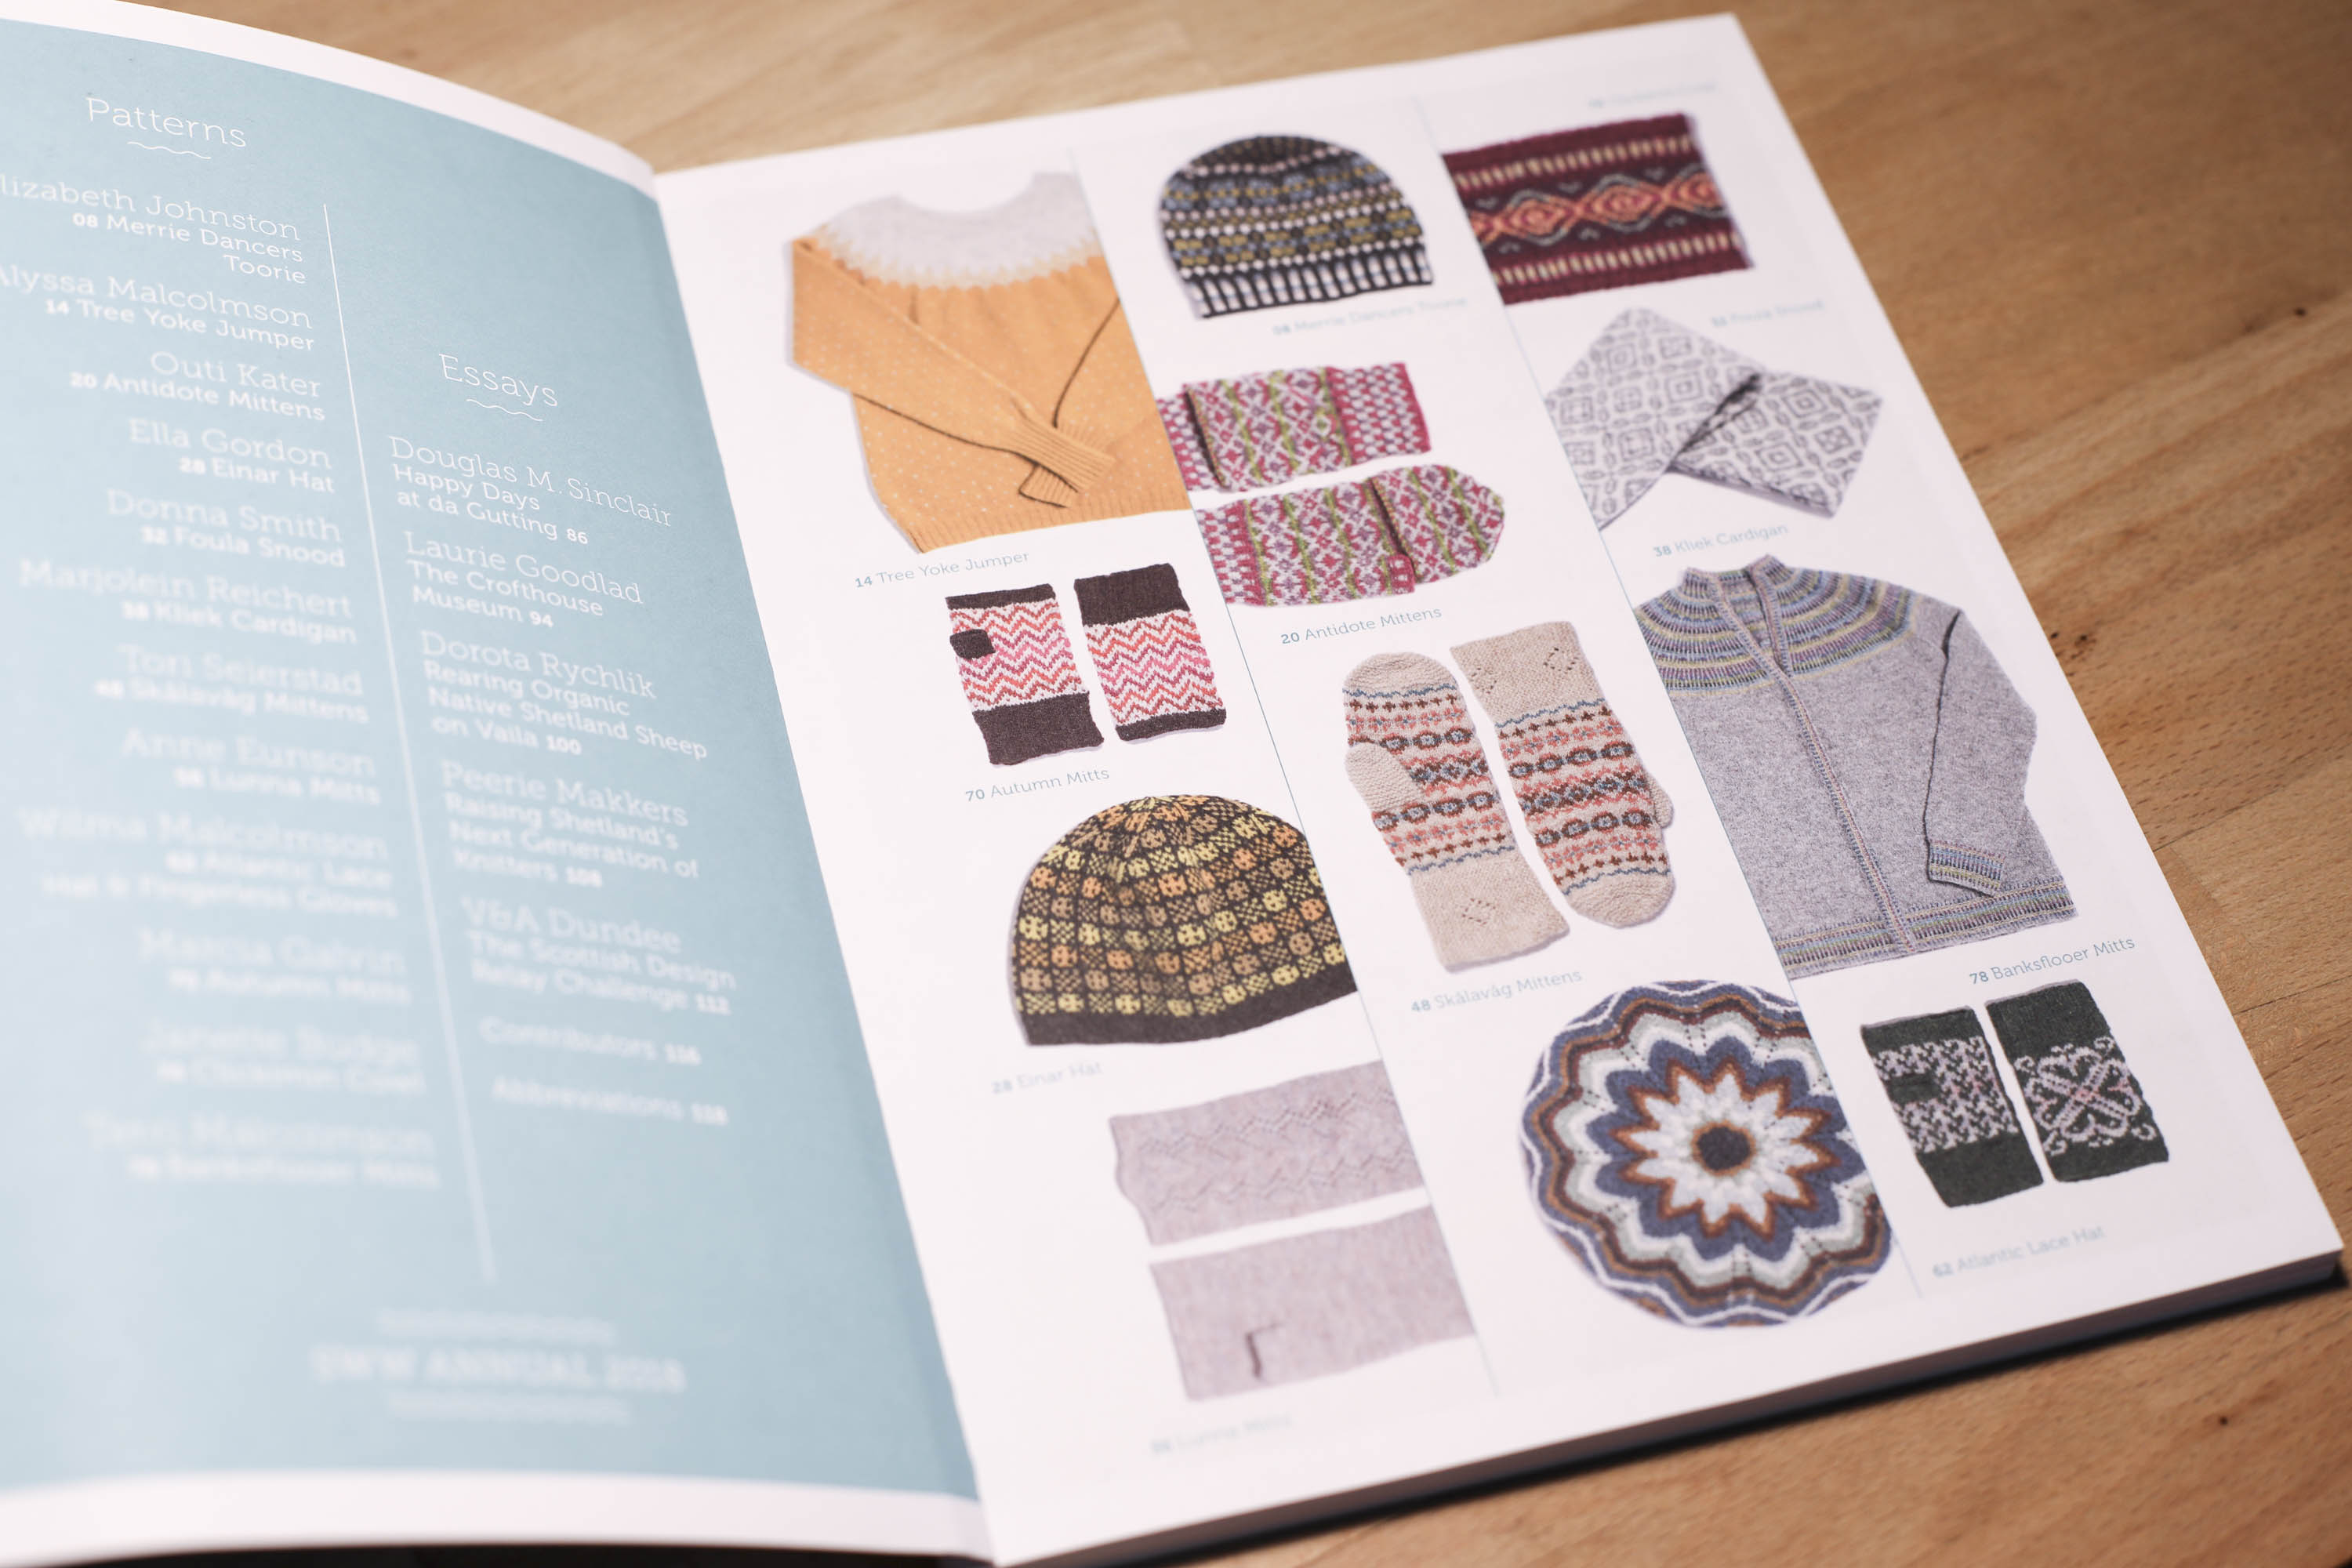 Shetland Wool Week annual 2018, open at page showing 12 patterns included